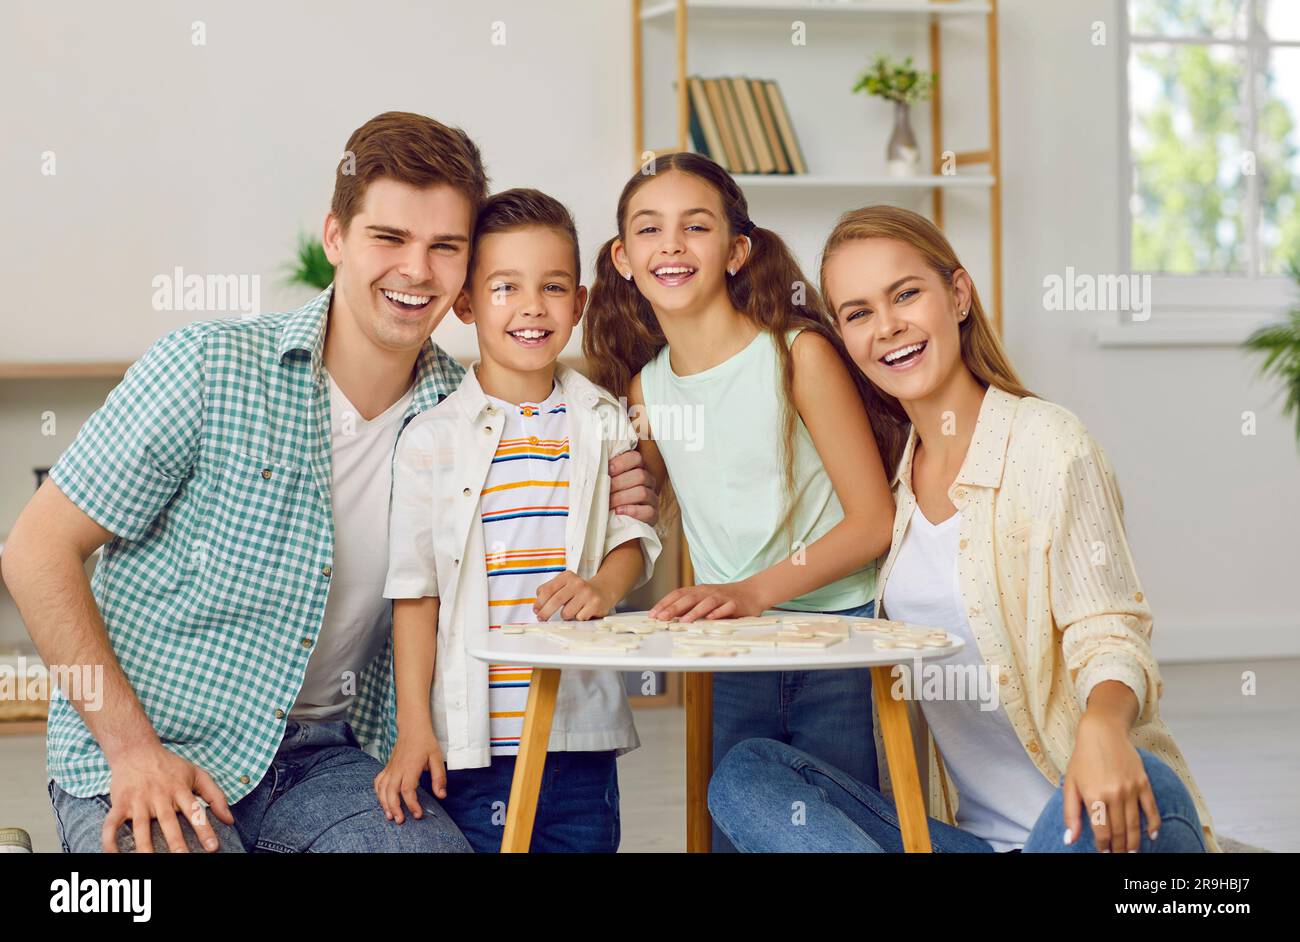 Happy family with two children are playing puzzles at table sitting on floor in living room. Stock Photo